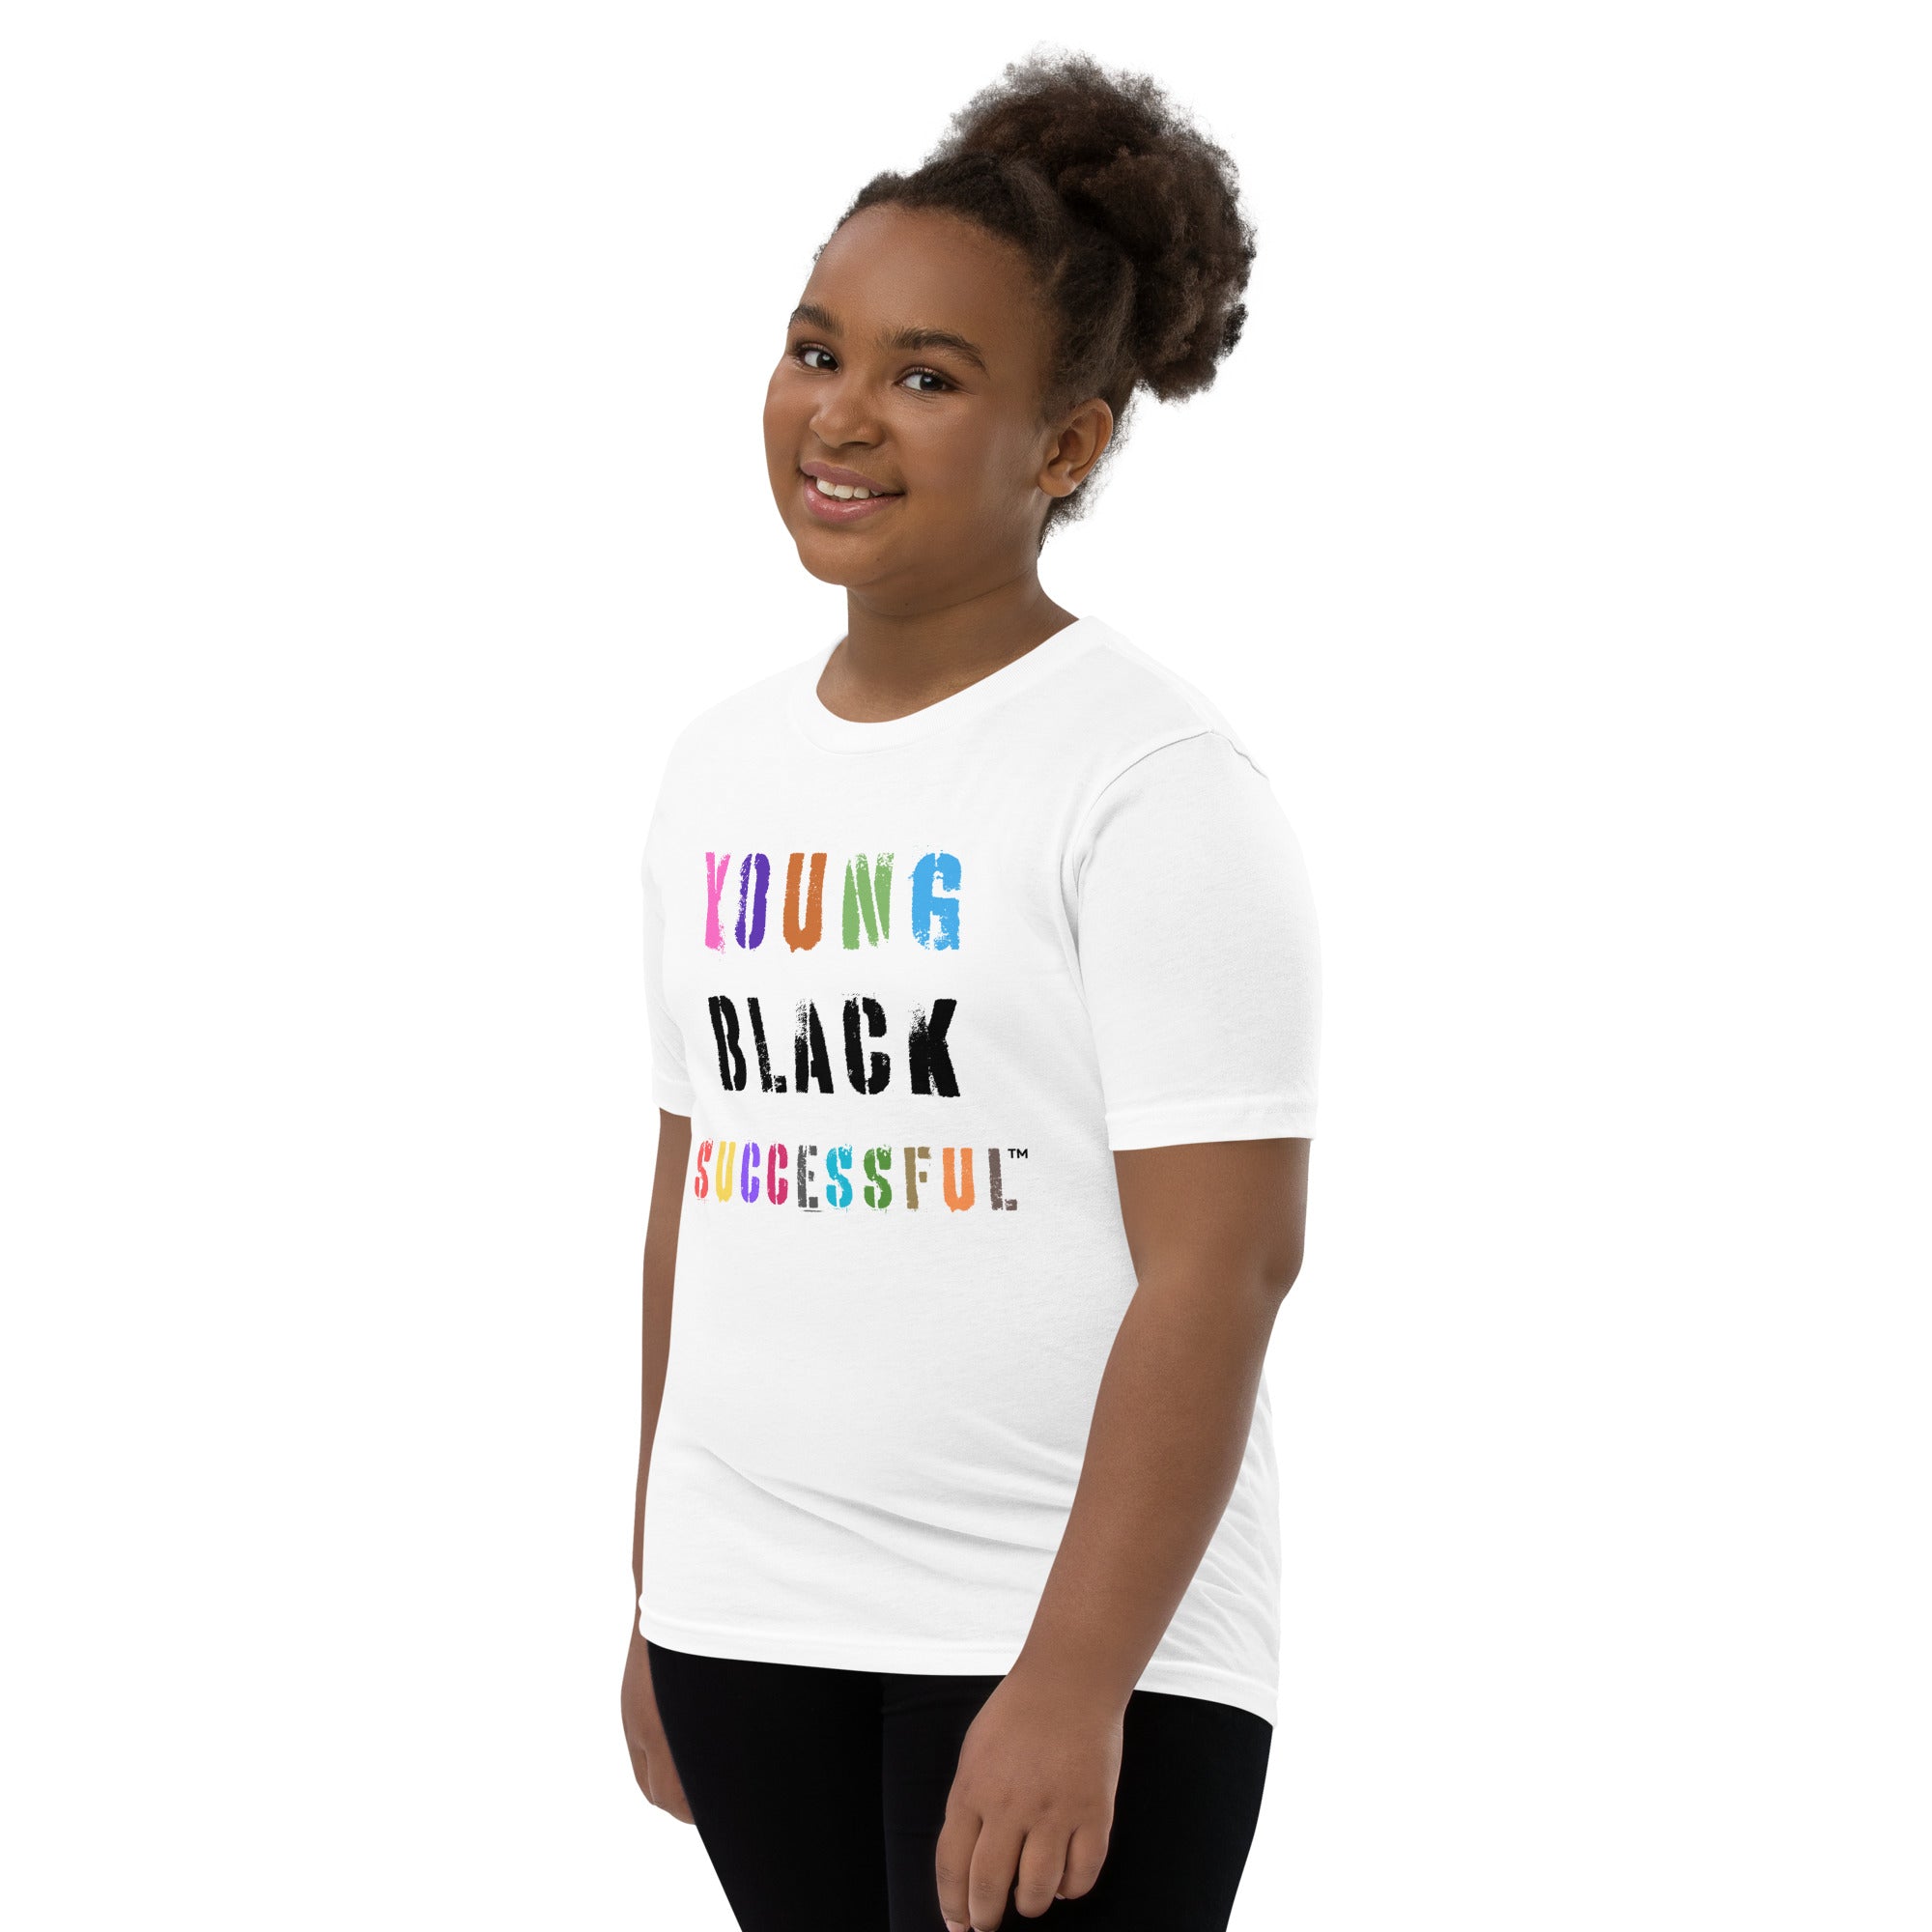 Young Black Successful TM Youth Short Sleeve T-Shirt